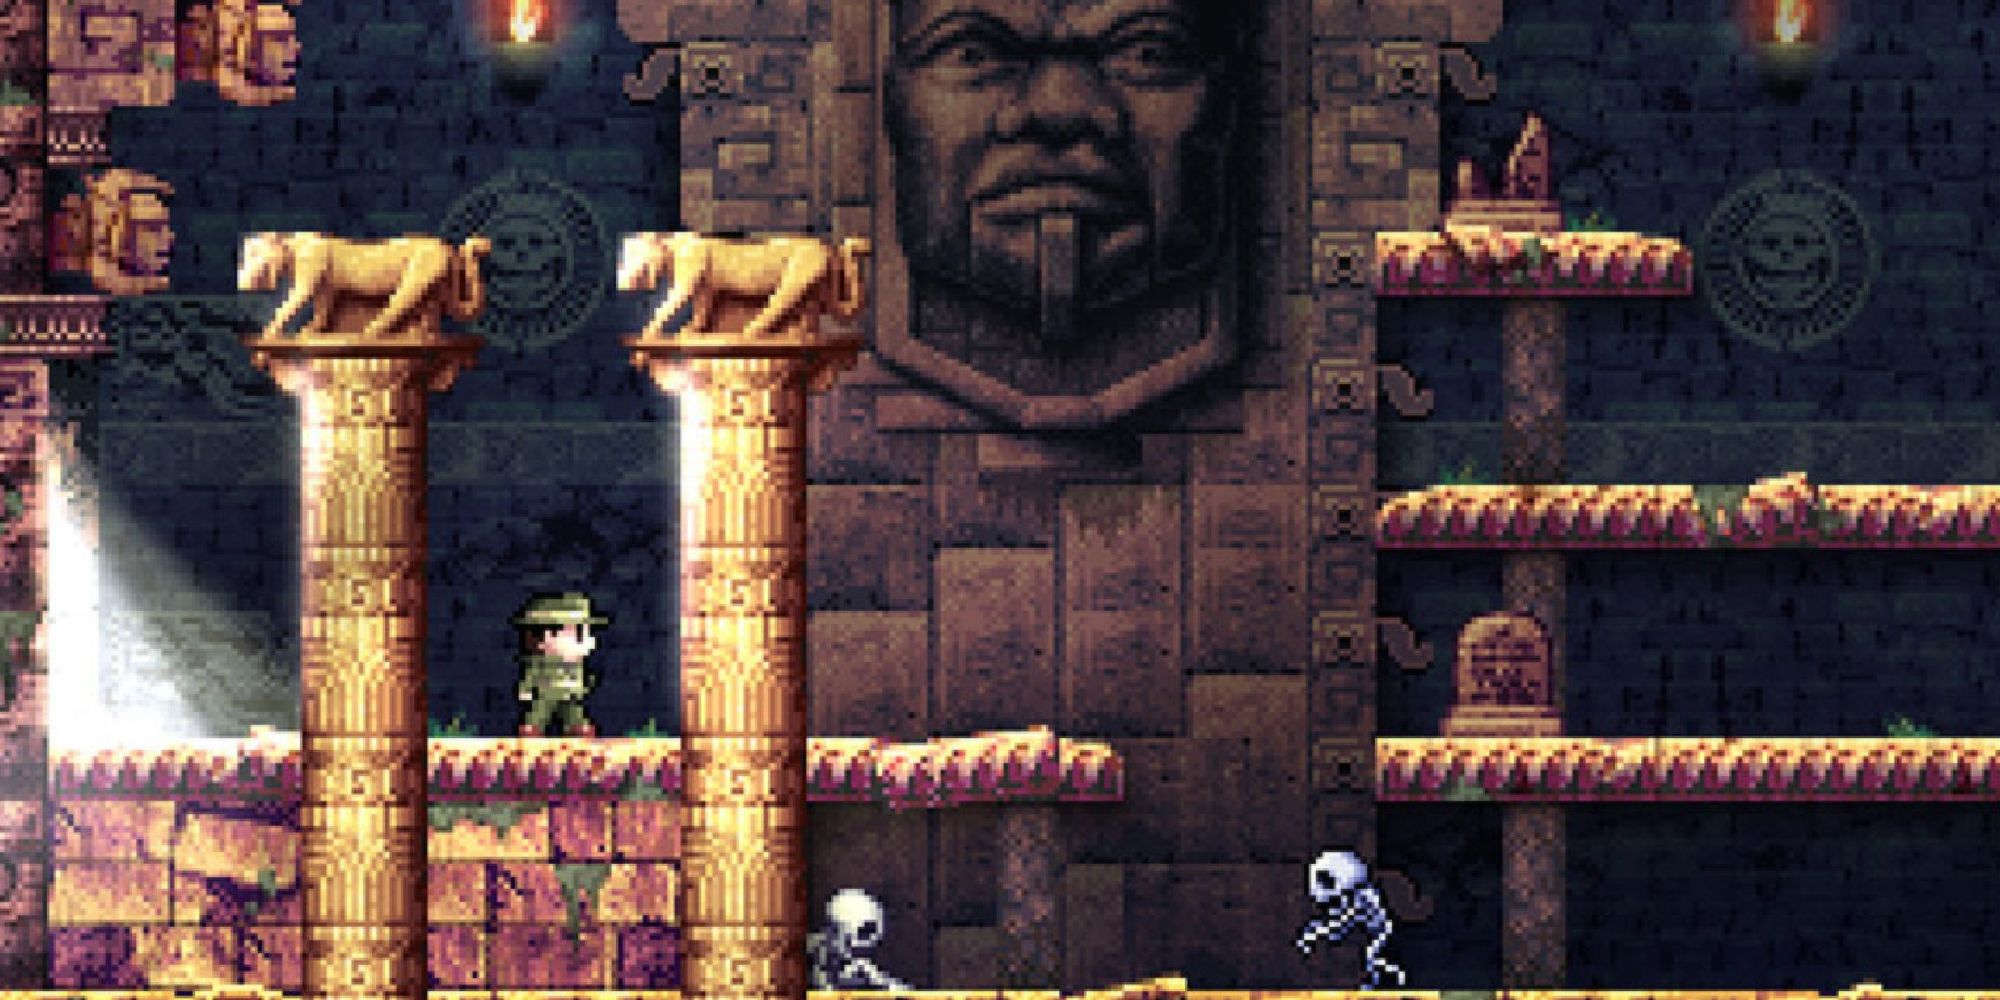 A screenshot from La-Mulana, showing the main character observing a mysterious temple room strewn with skeletons